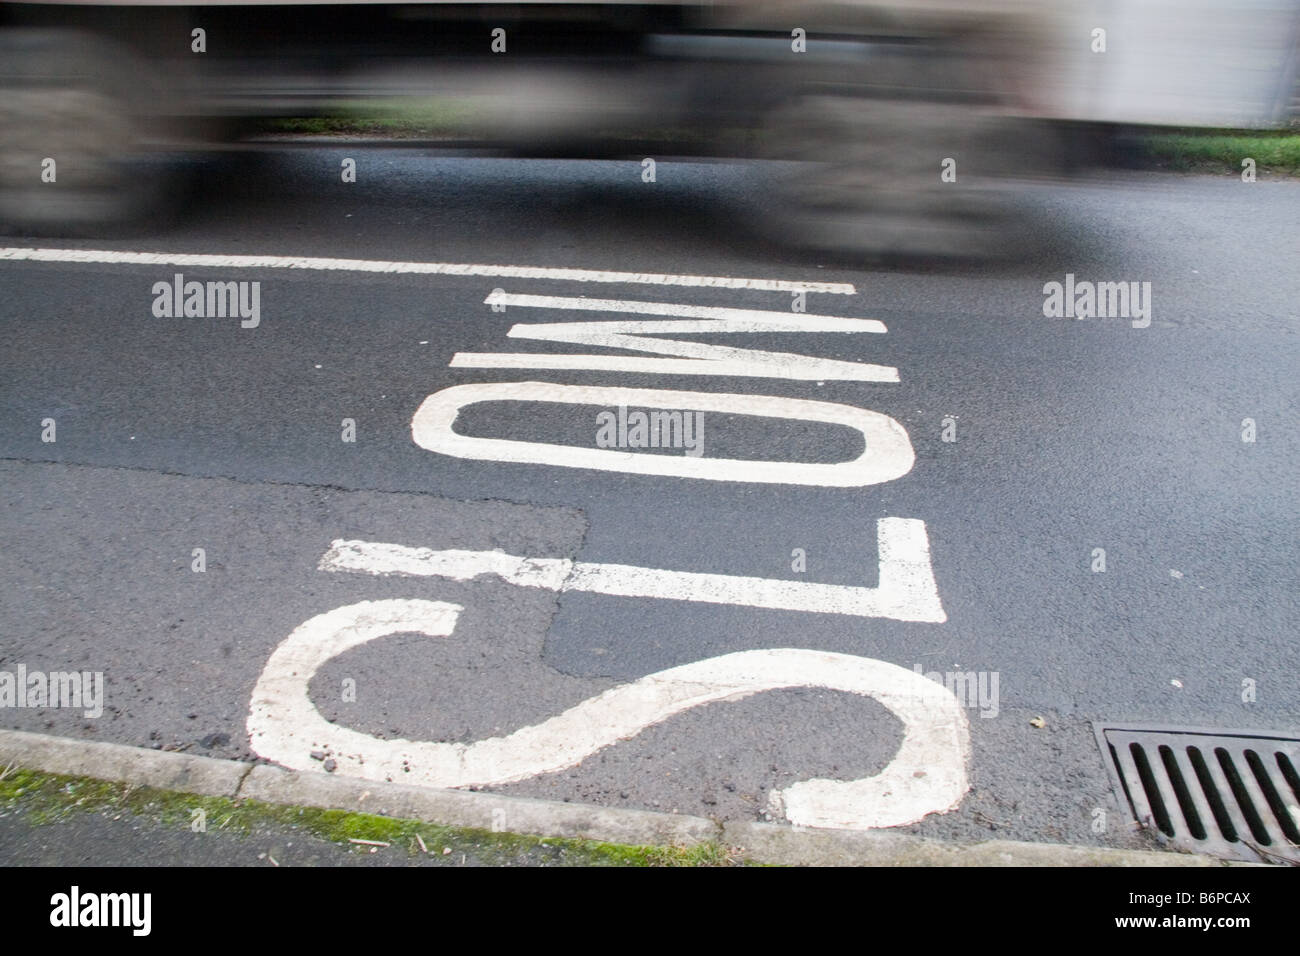 Car in motion blur photographed driving by a SLOW sign in the road Stock Photo